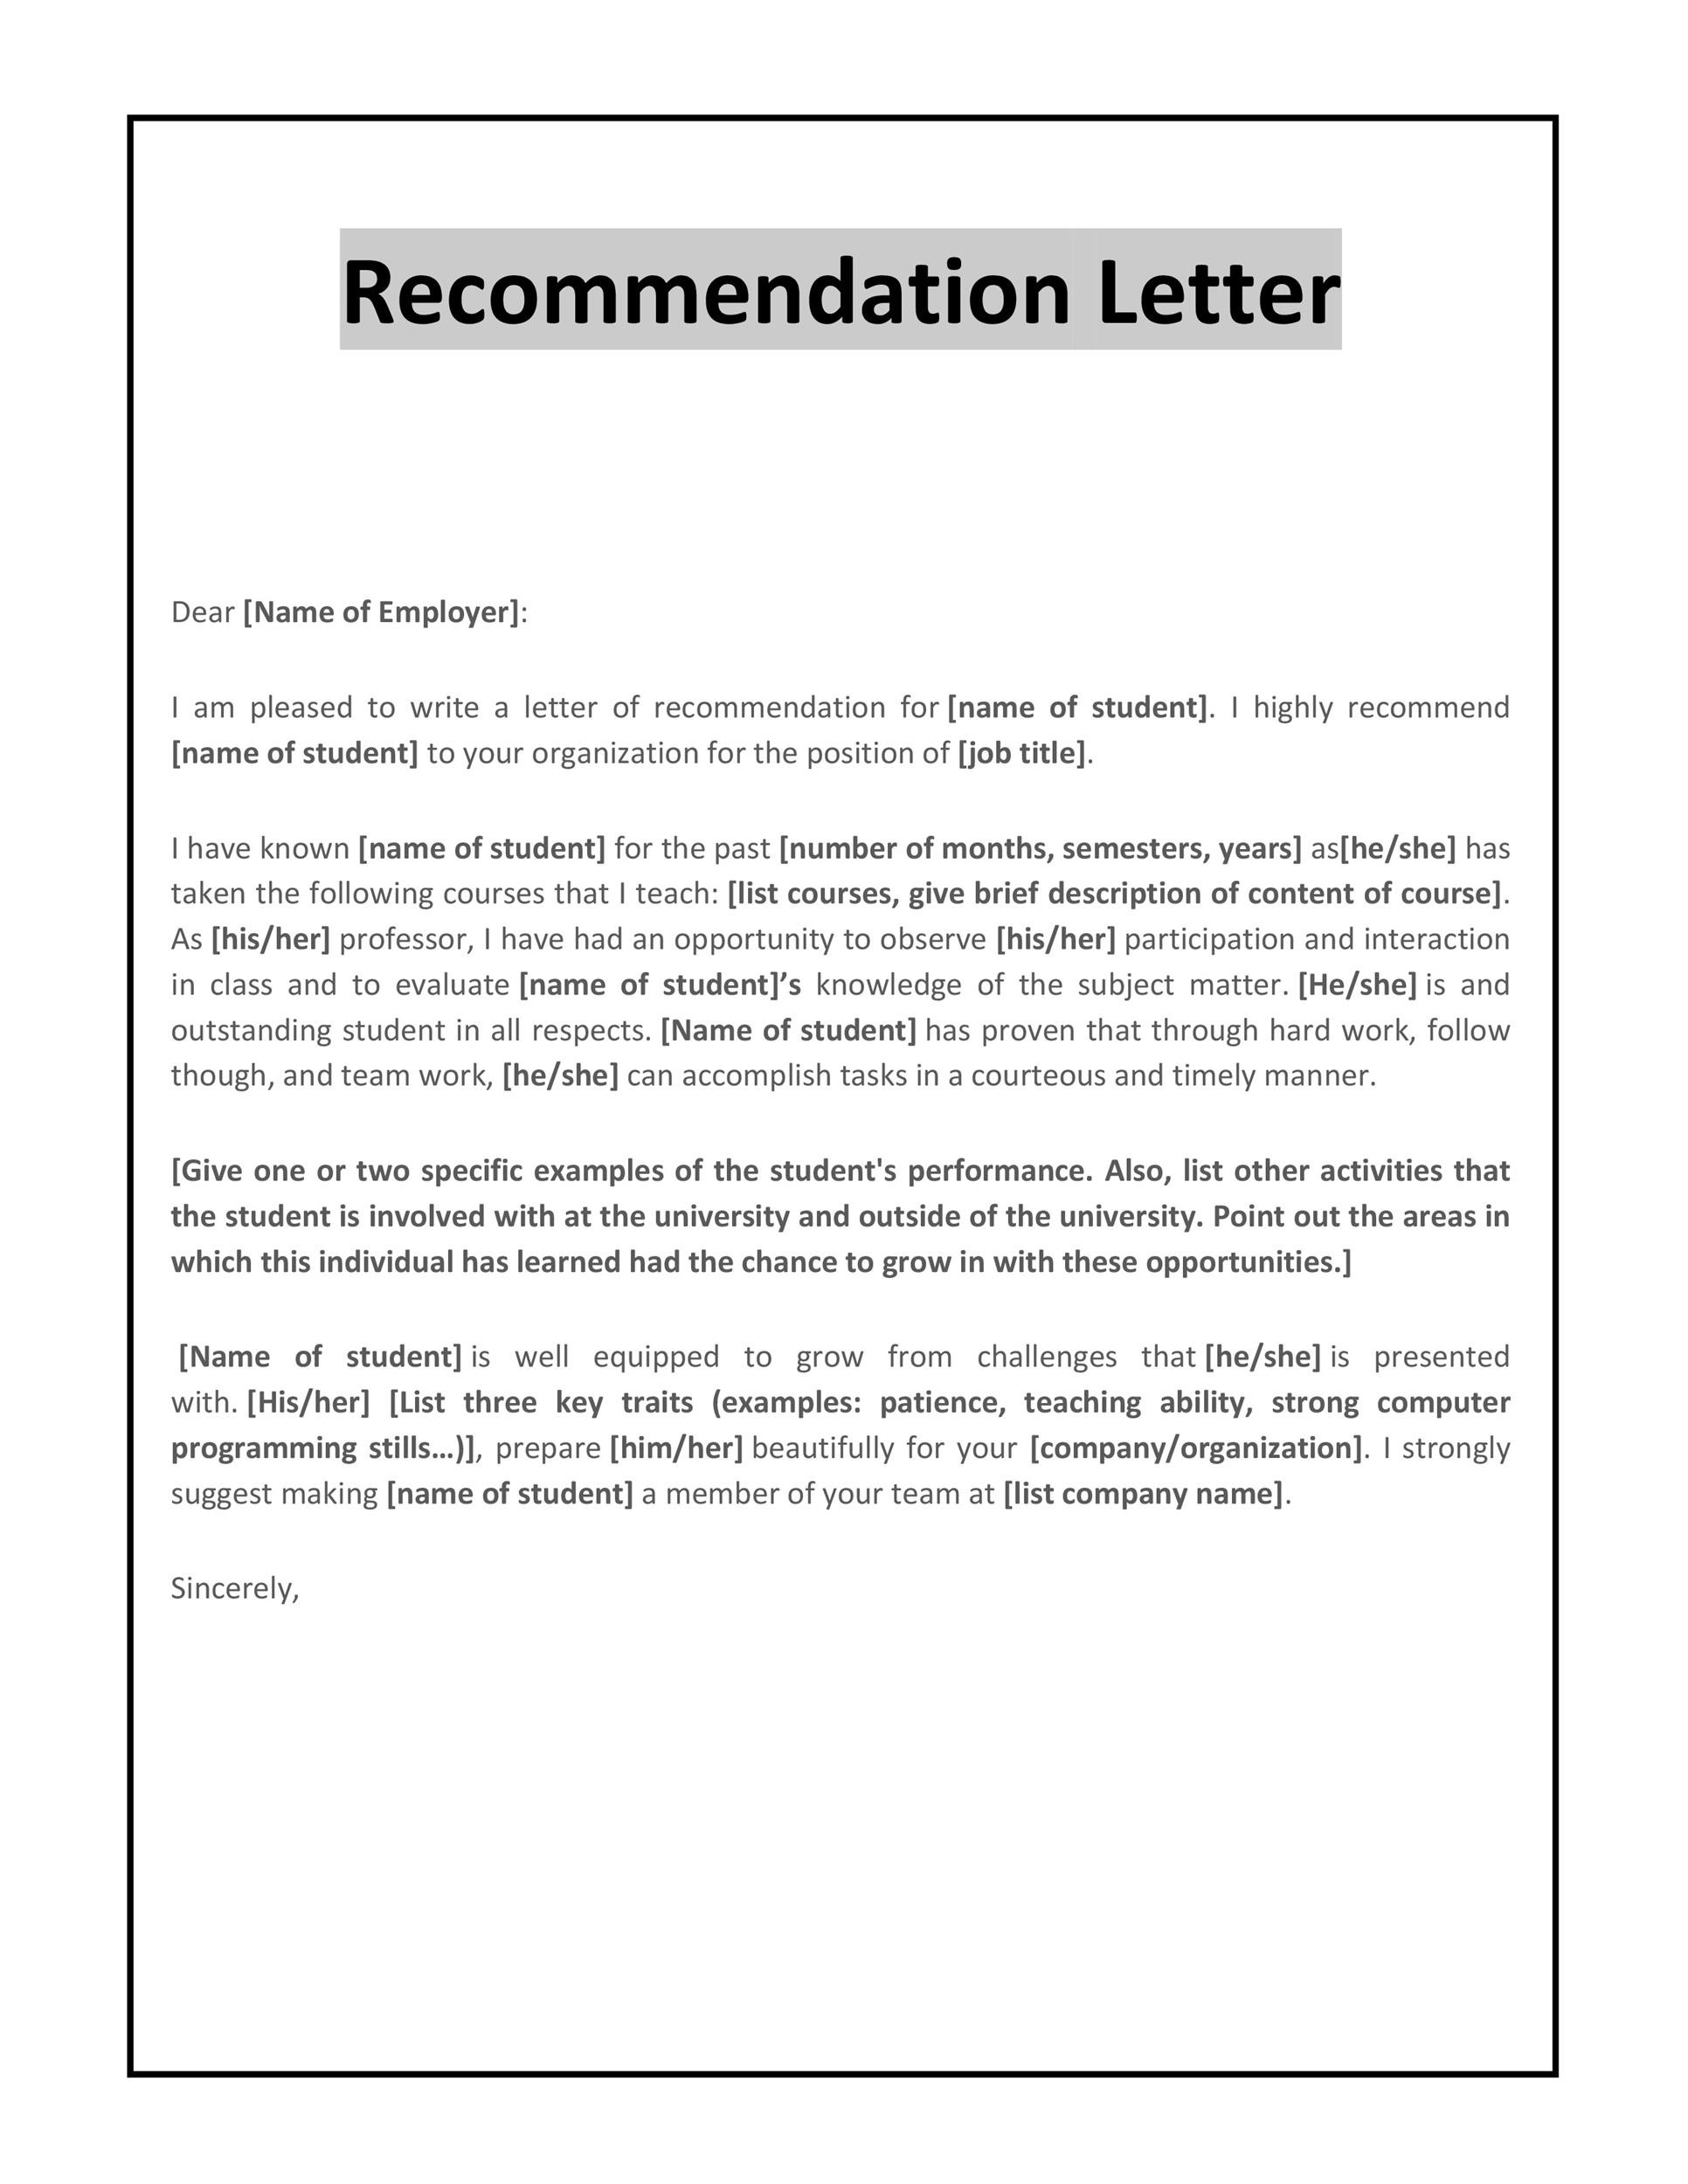 how to write a letter of recommendation for employment